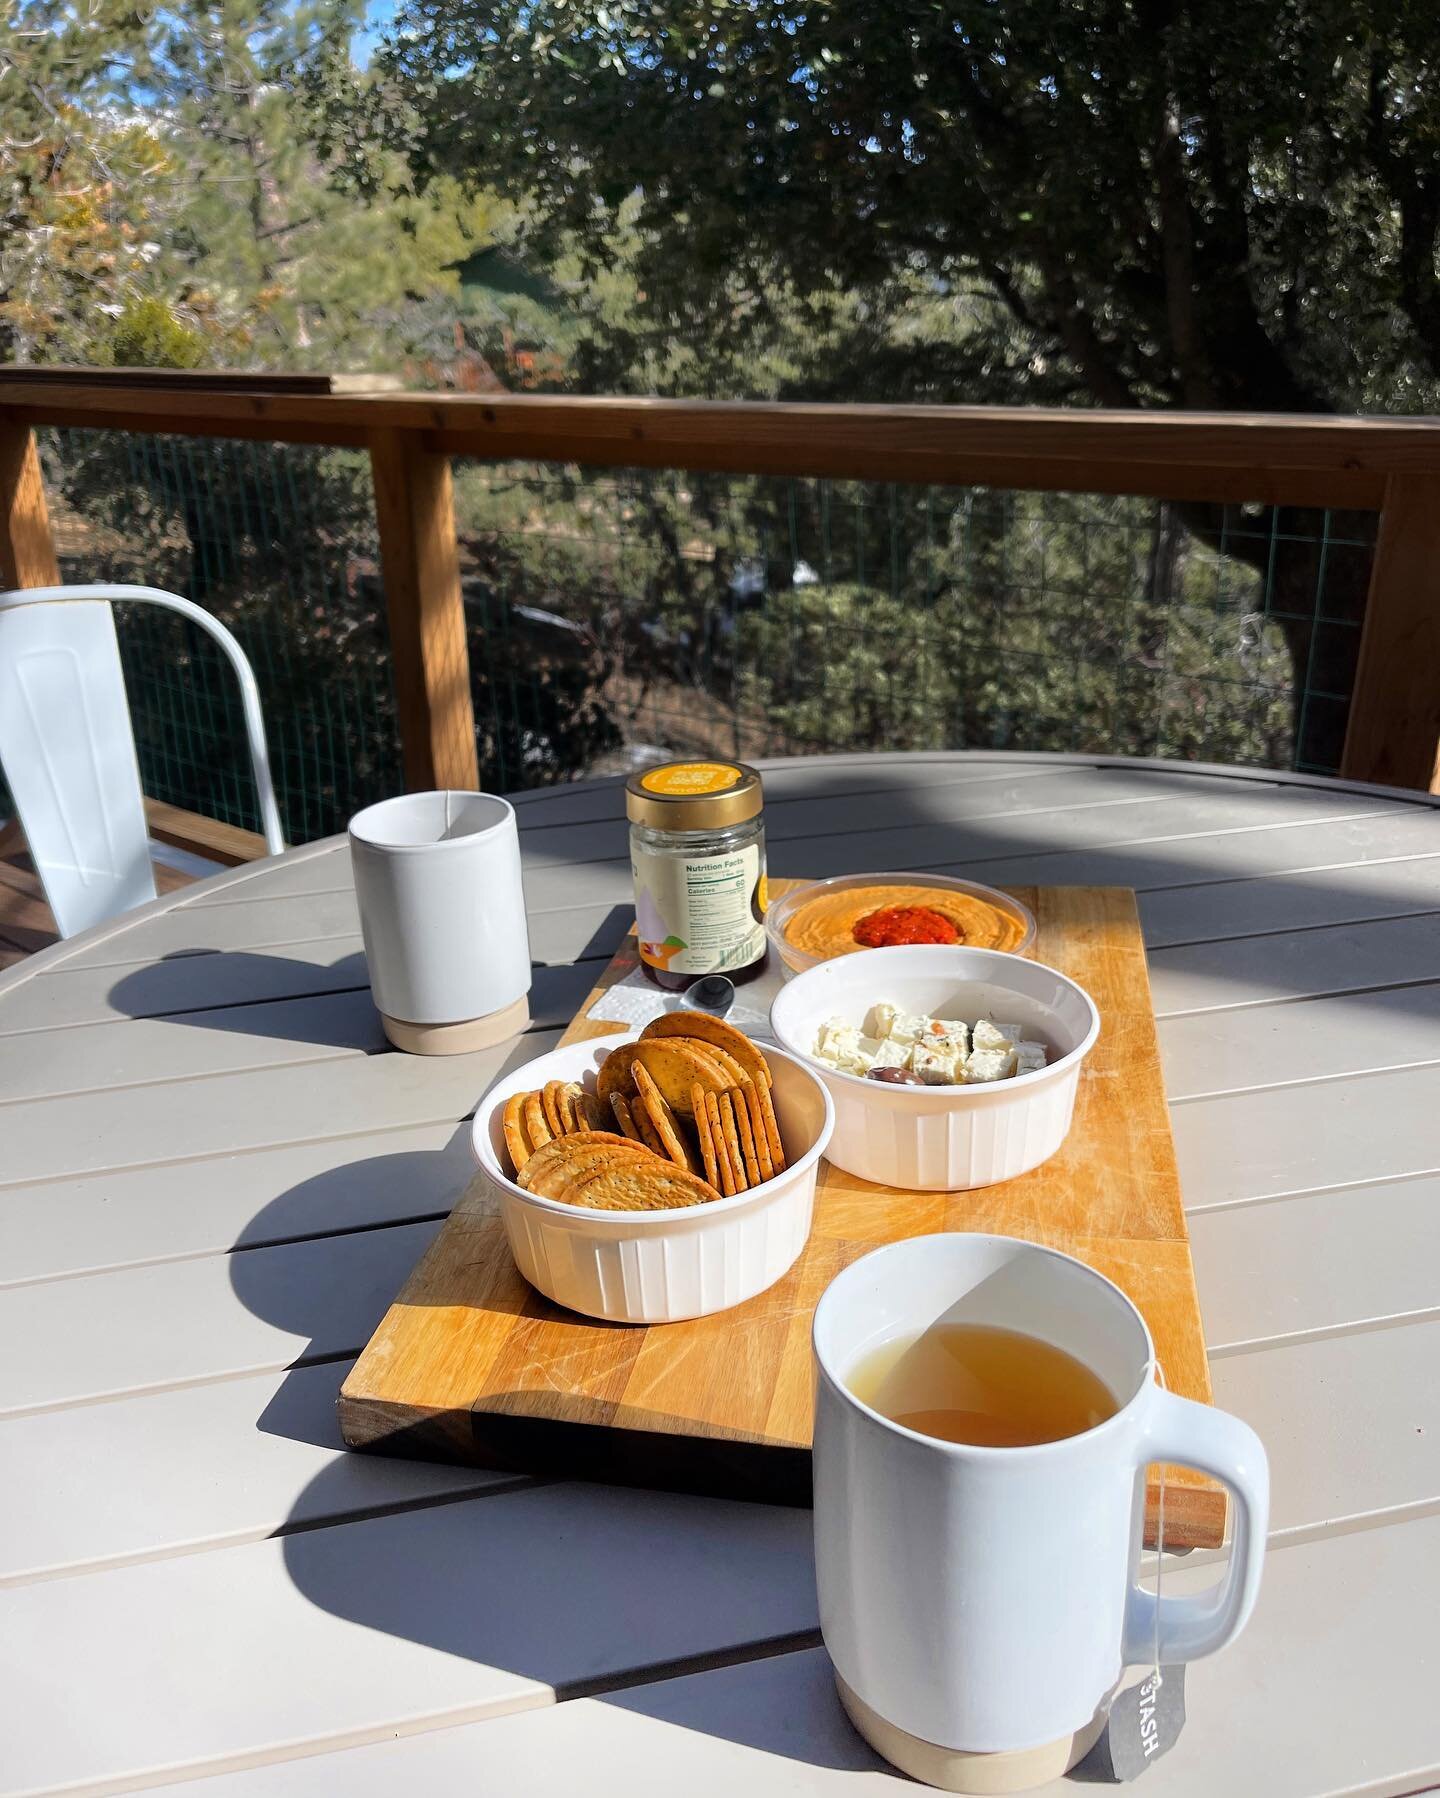 The weather in Idyllwild is forecast to be splendid with a chance of gorgeous. We&rsquo;re watching the squirrels do tree acrobatics, while we have afternoon tea with Mountain wildflower, honey, and some Mediterranean munchies. Splendid, indeed!